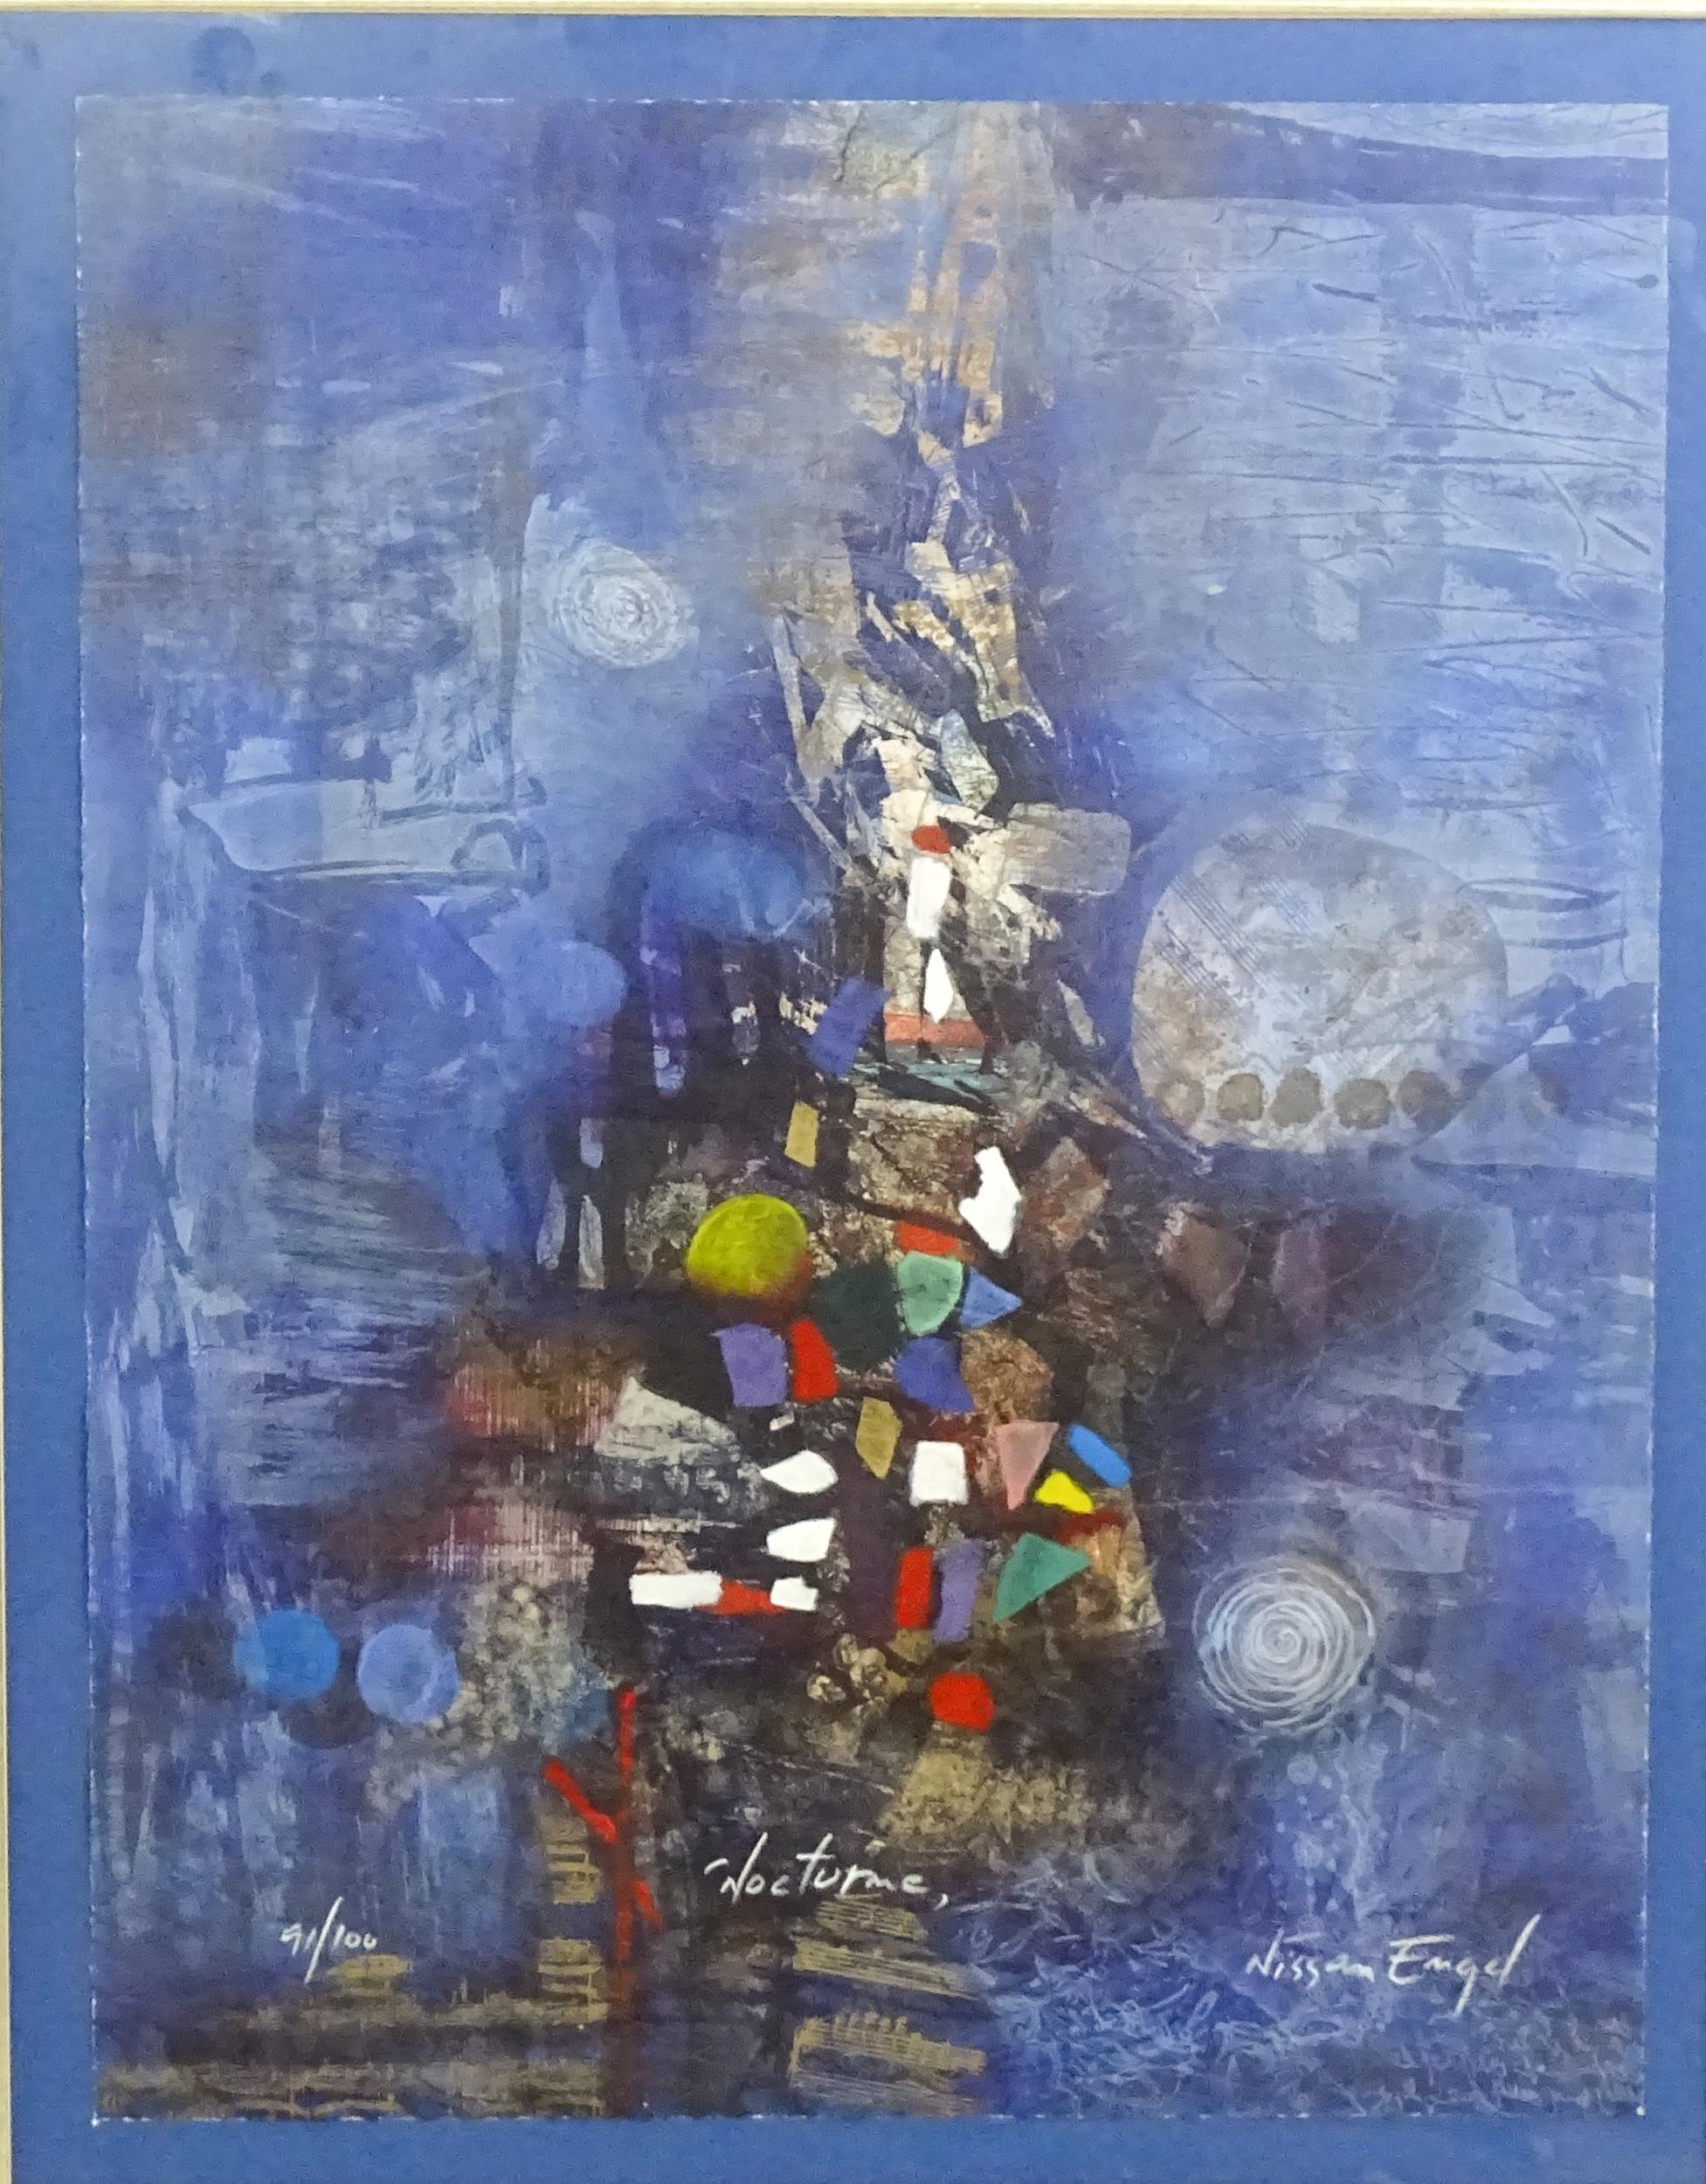 Nissan Engel (b. 1931), Israeli School, Limited edition print, Nocturne, An abstract composition. - Image 3 of 5